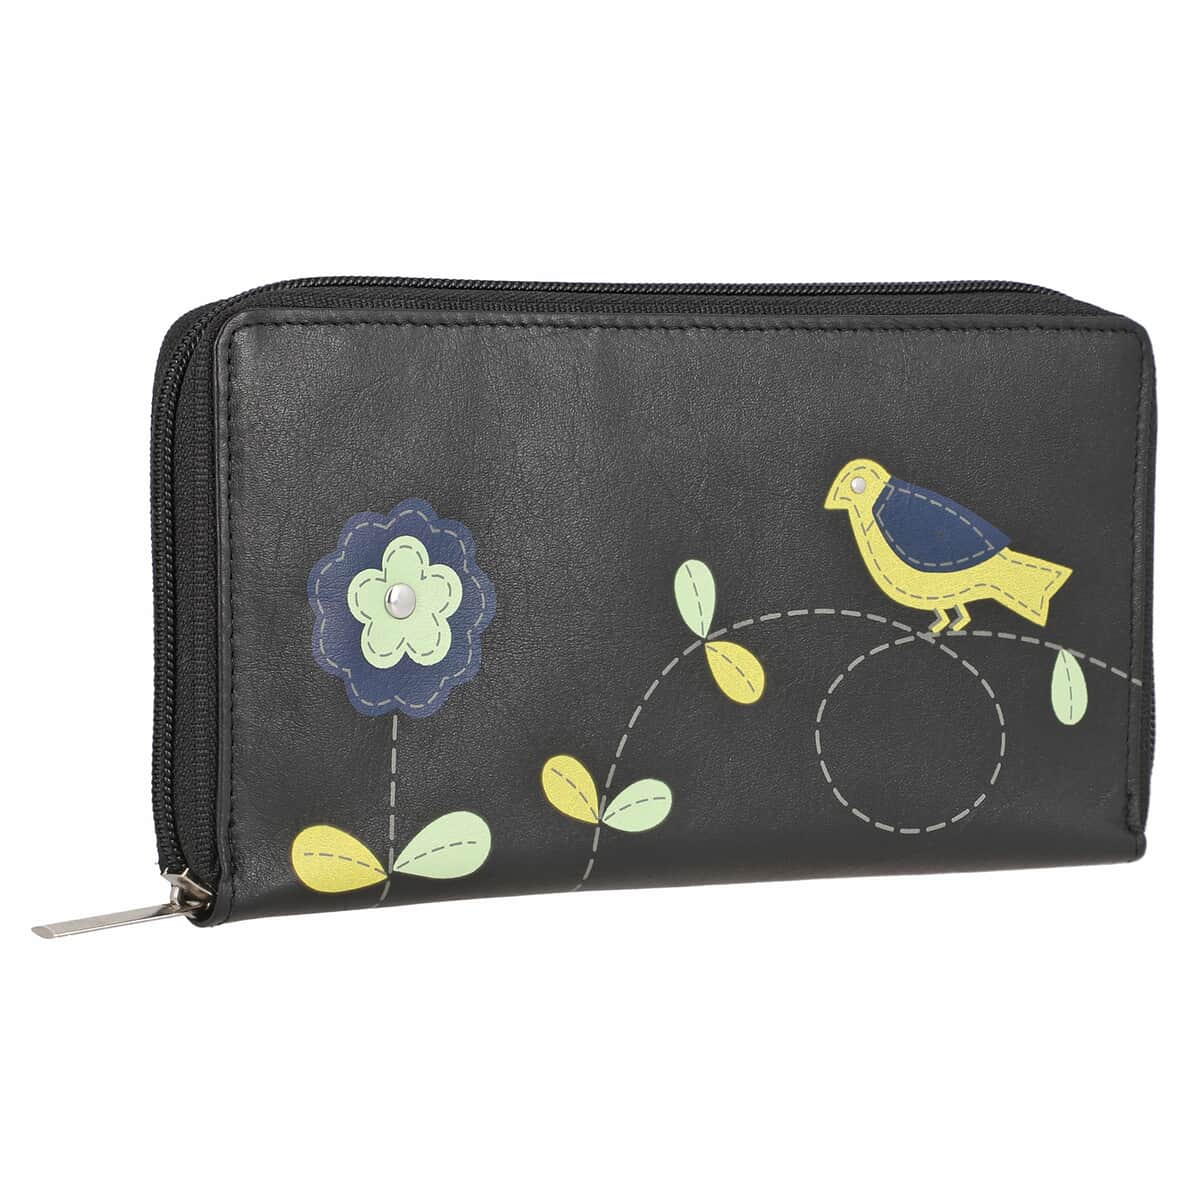 Union Code Black Color Floral Pattern 100% Genuine Leather RFID Protected Applique Women's Wallet image number 2